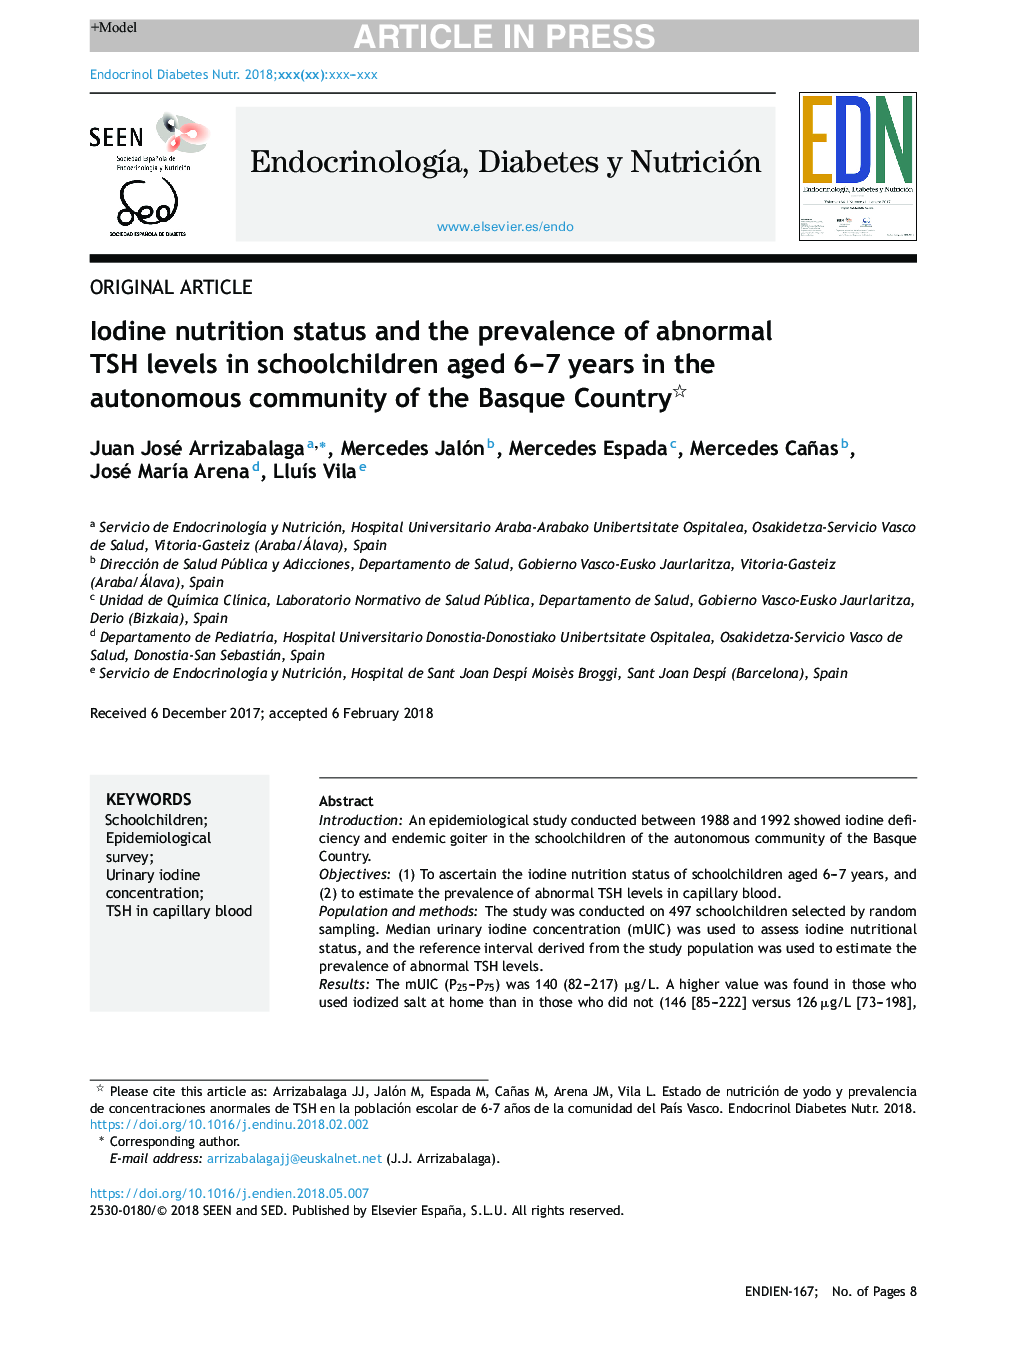 Iodine nutrition status and the prevalence of abnormal TSH levels in schoolchildren aged 6-7 years in the autonomous community of the Basque Country